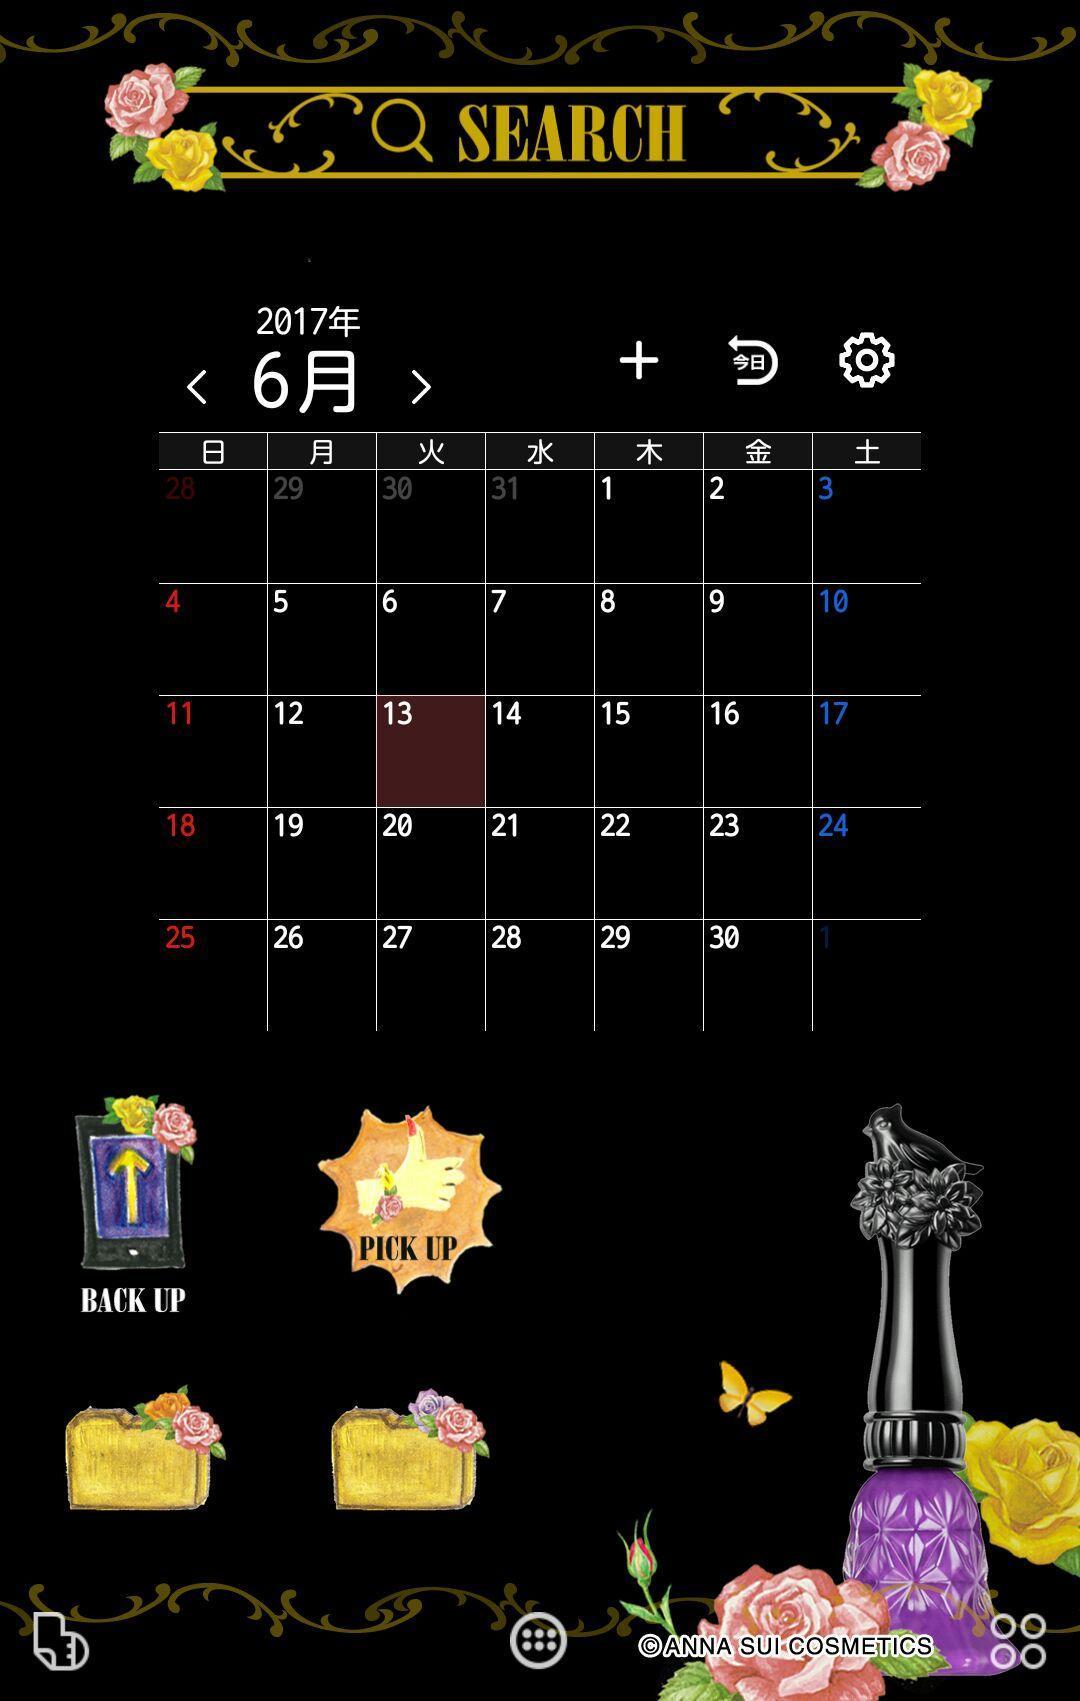 Anna Sui 壁紙きせかえ For Android Apk Download